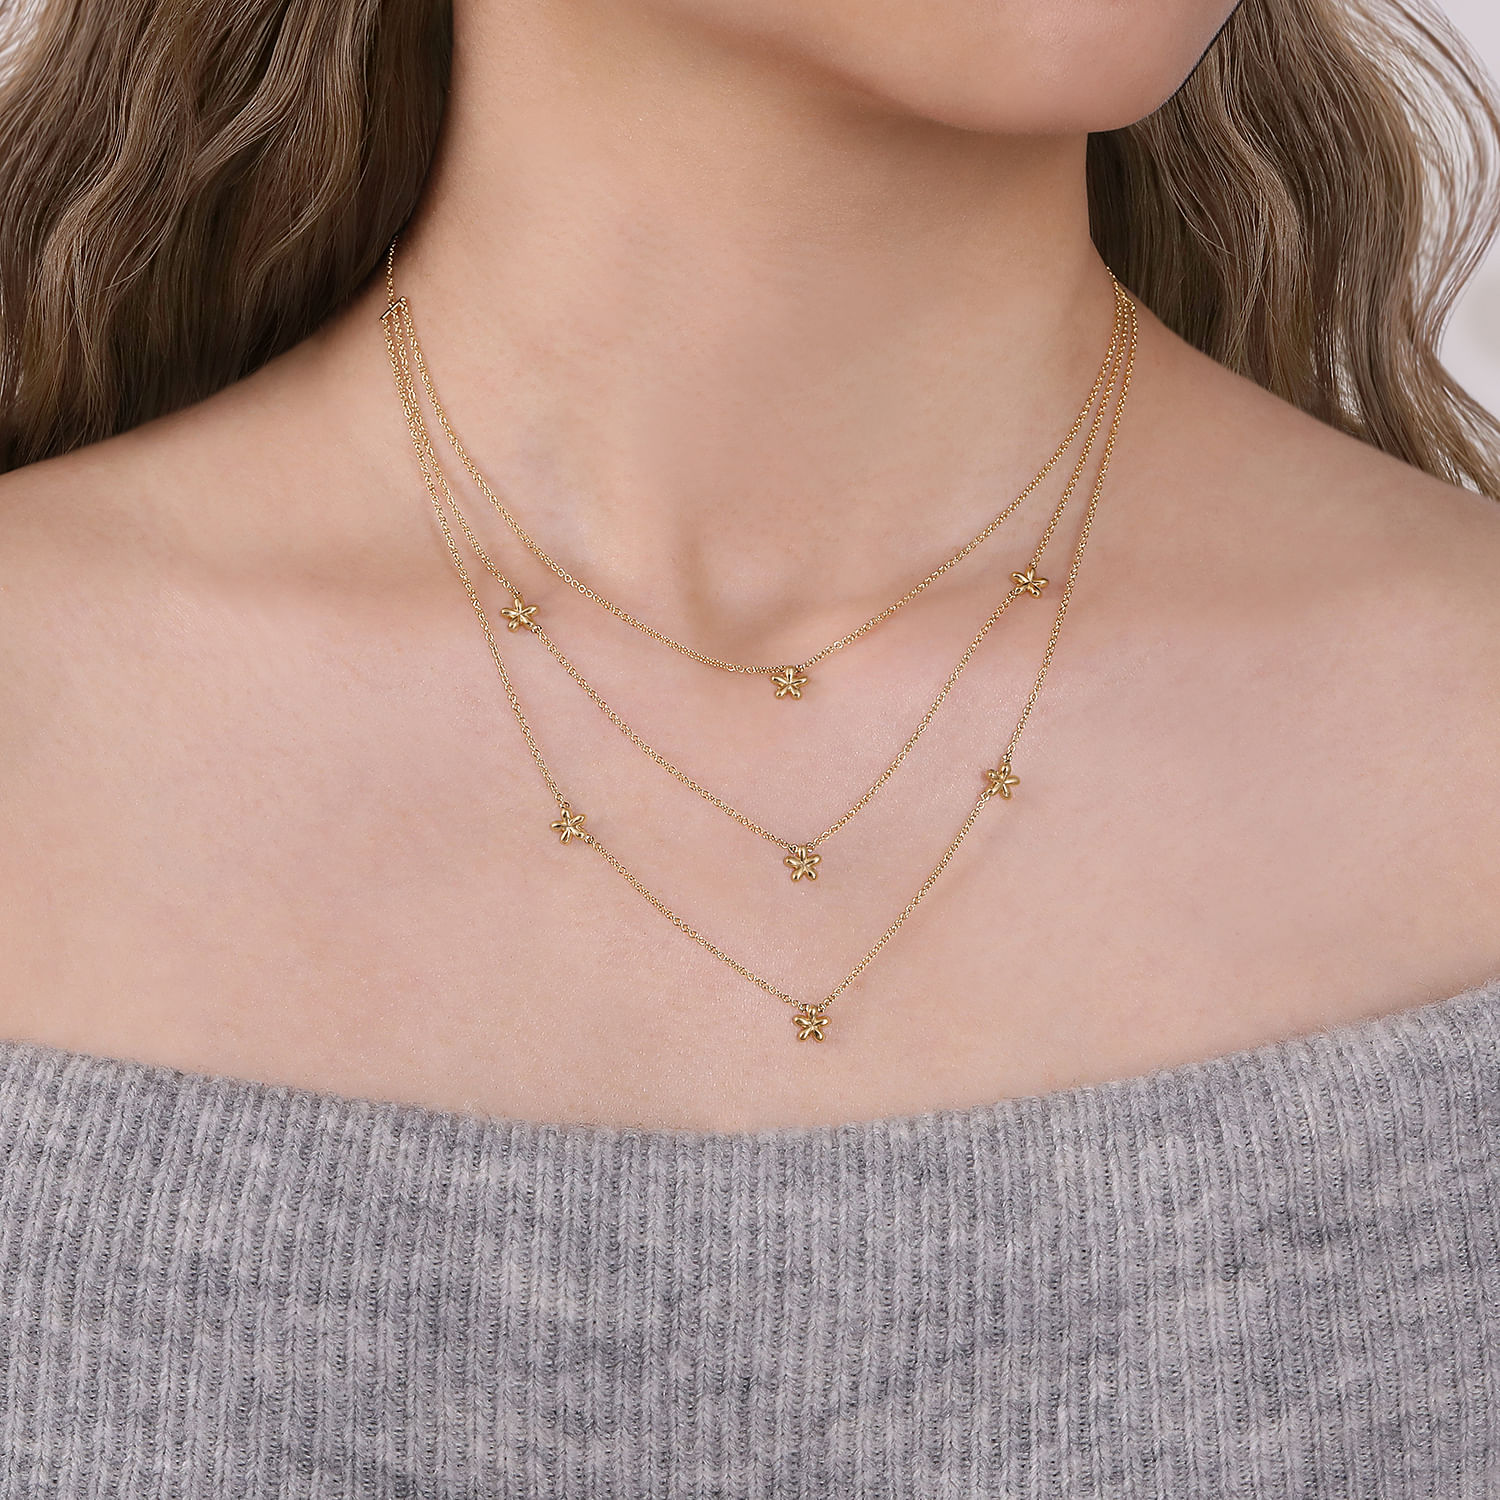 14K Yellow Gold Three Row Floral Drop Necklace